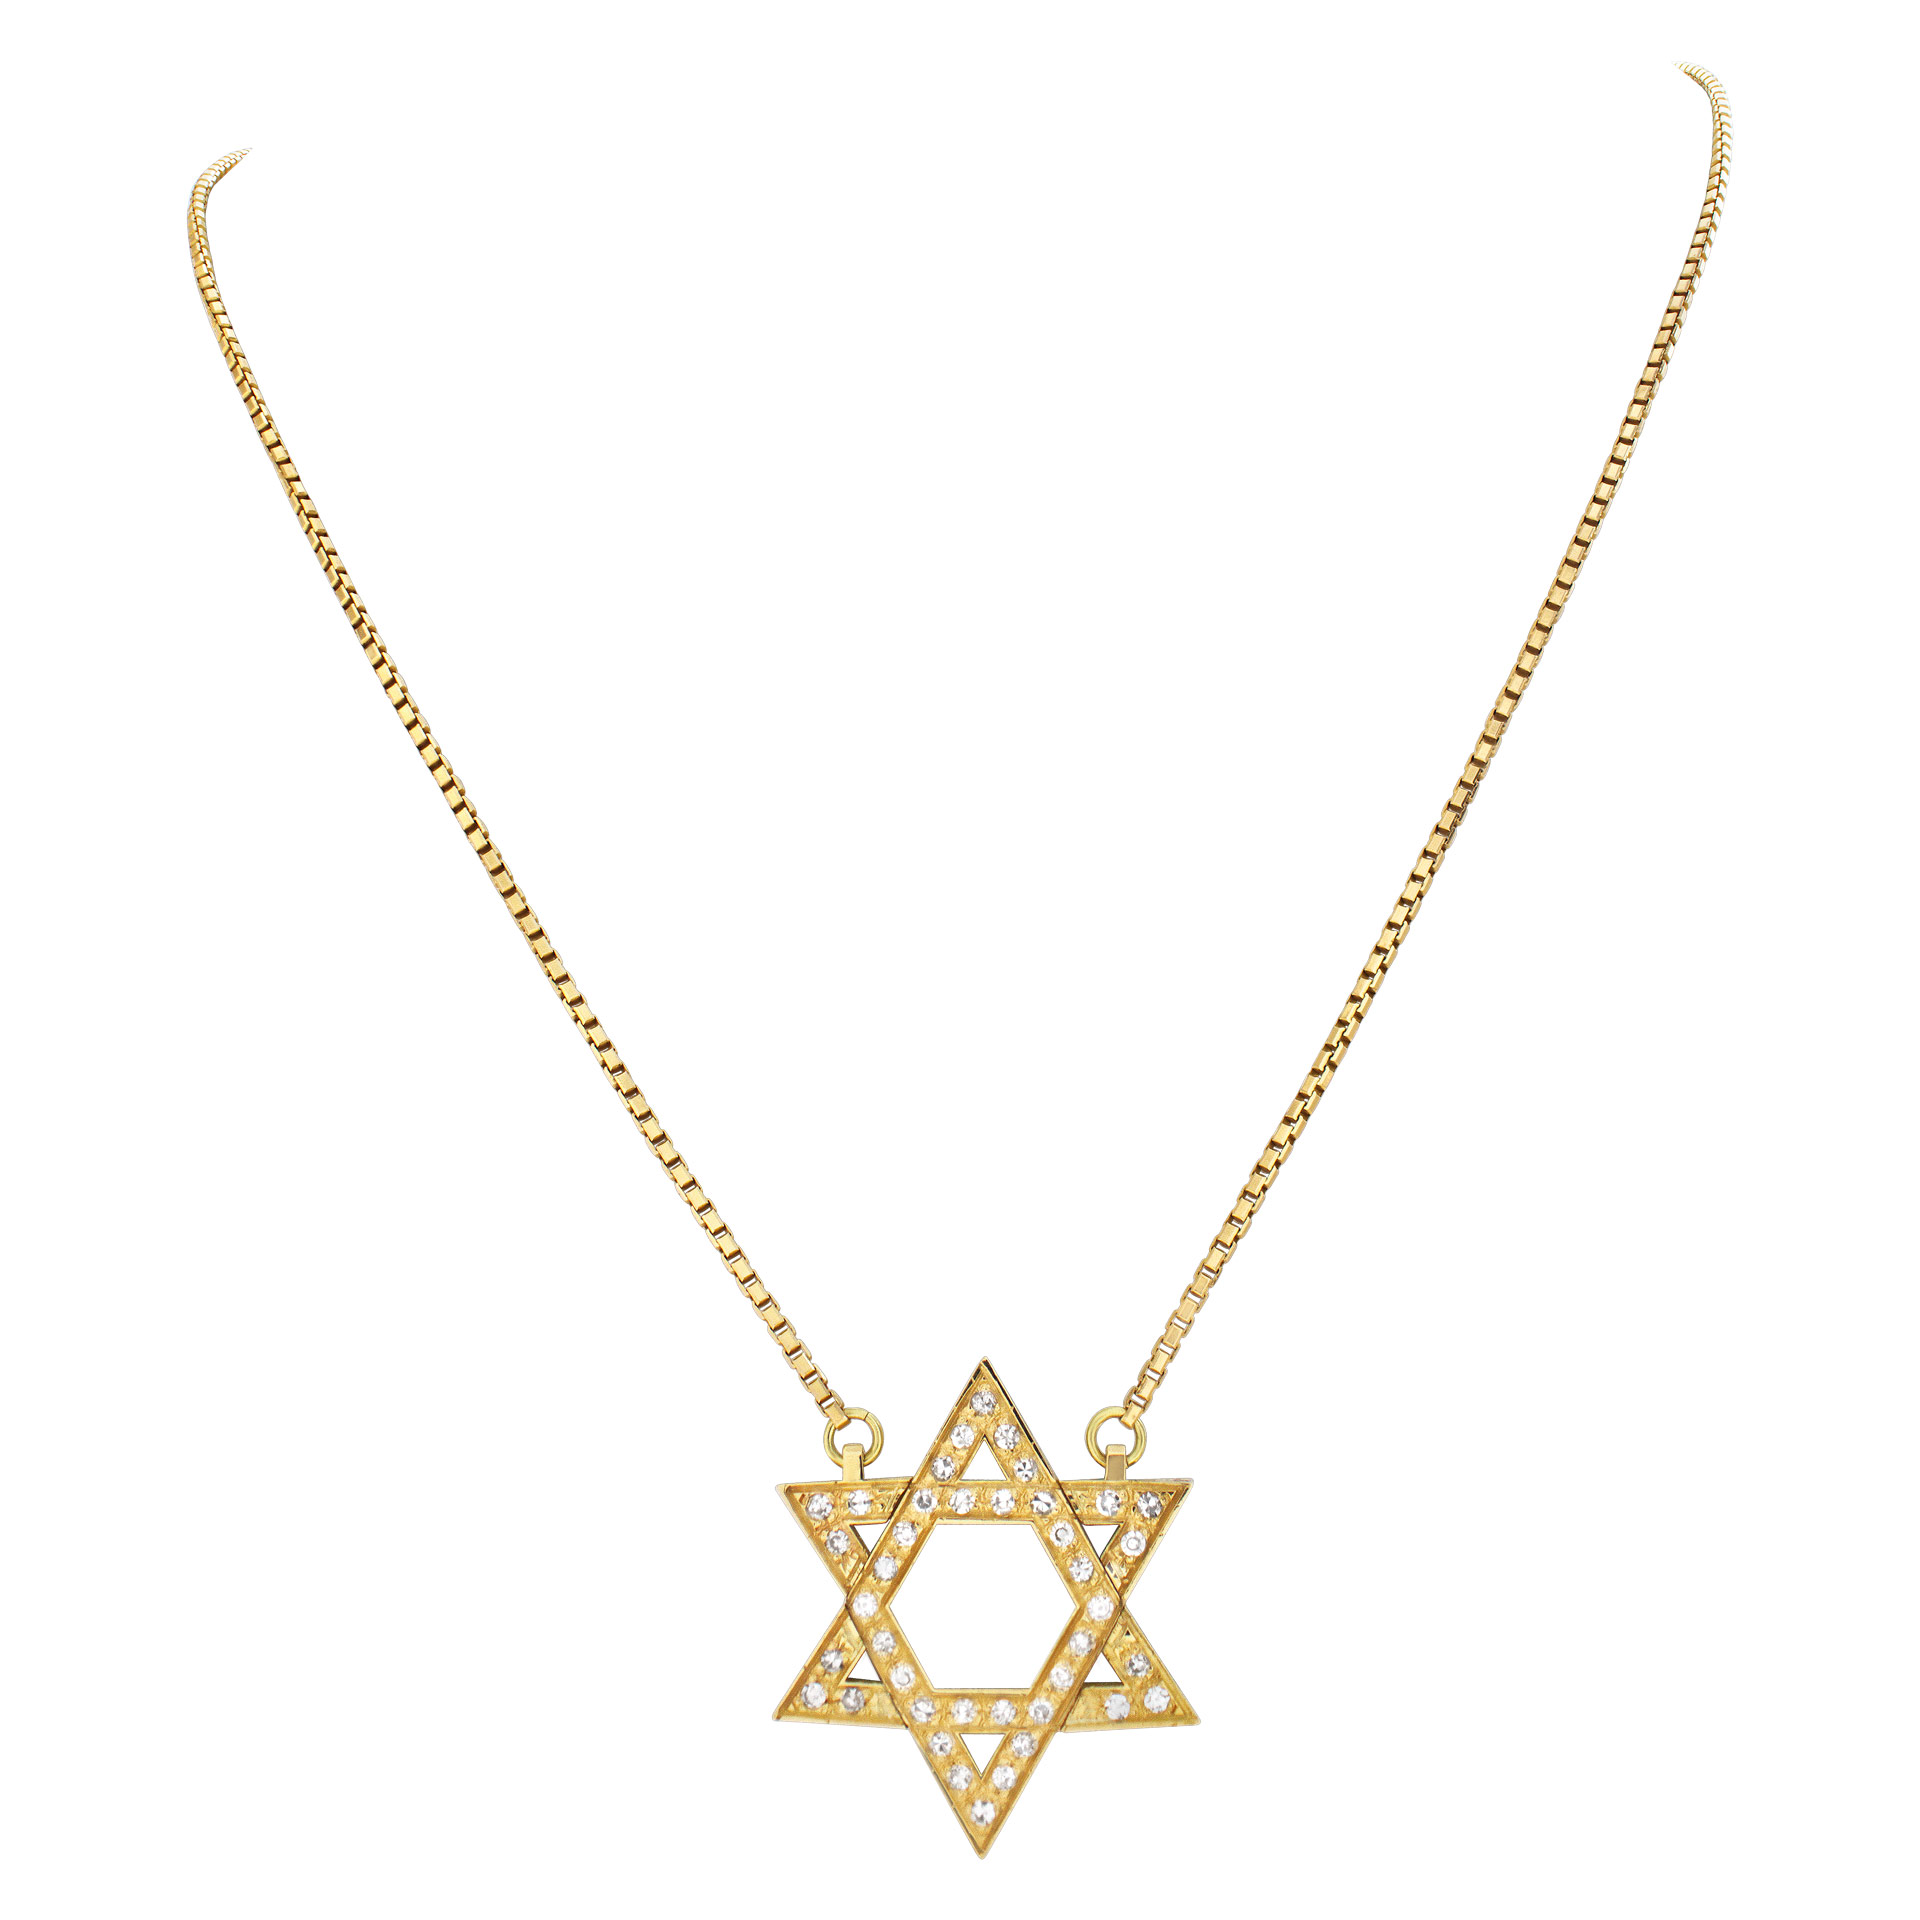 "Star of David" pendant with approximately 0.75 carat pave diamonds set in 18k yellow gold image 1